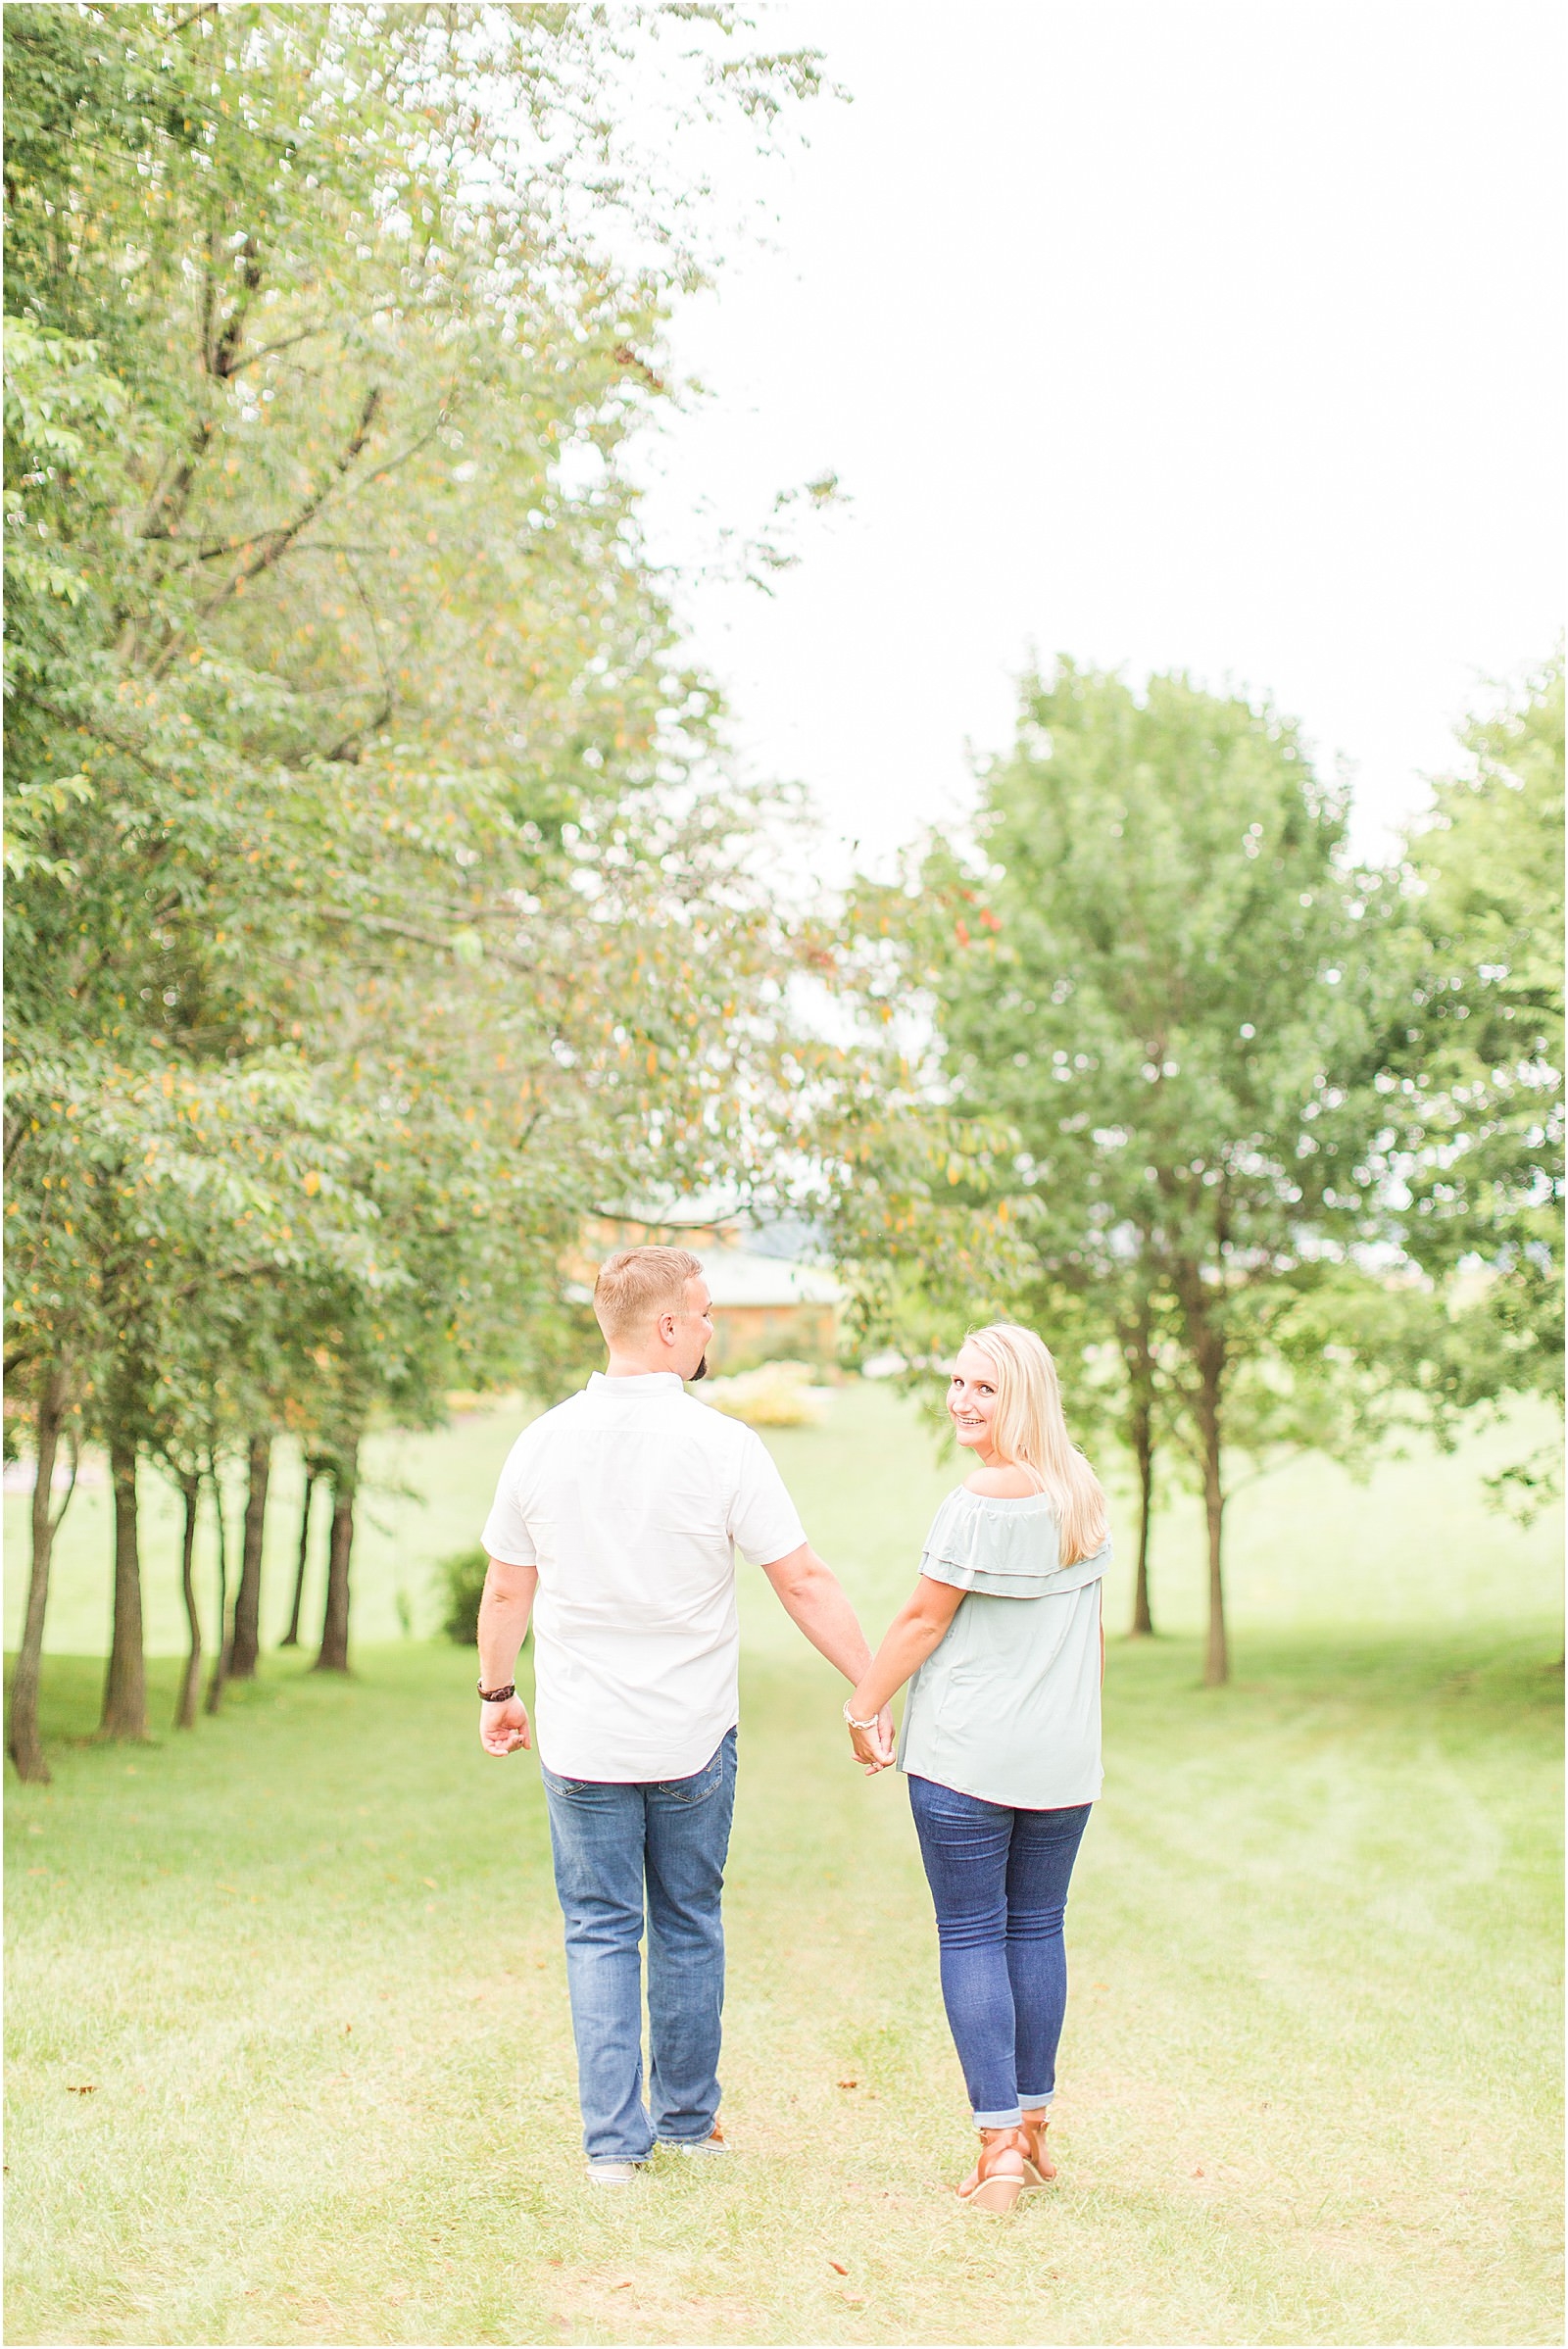 Lauren and Bryce | The Corner House B&ed and Breakfast Engagement Session | Bret and Brandie Photography 008.jpg